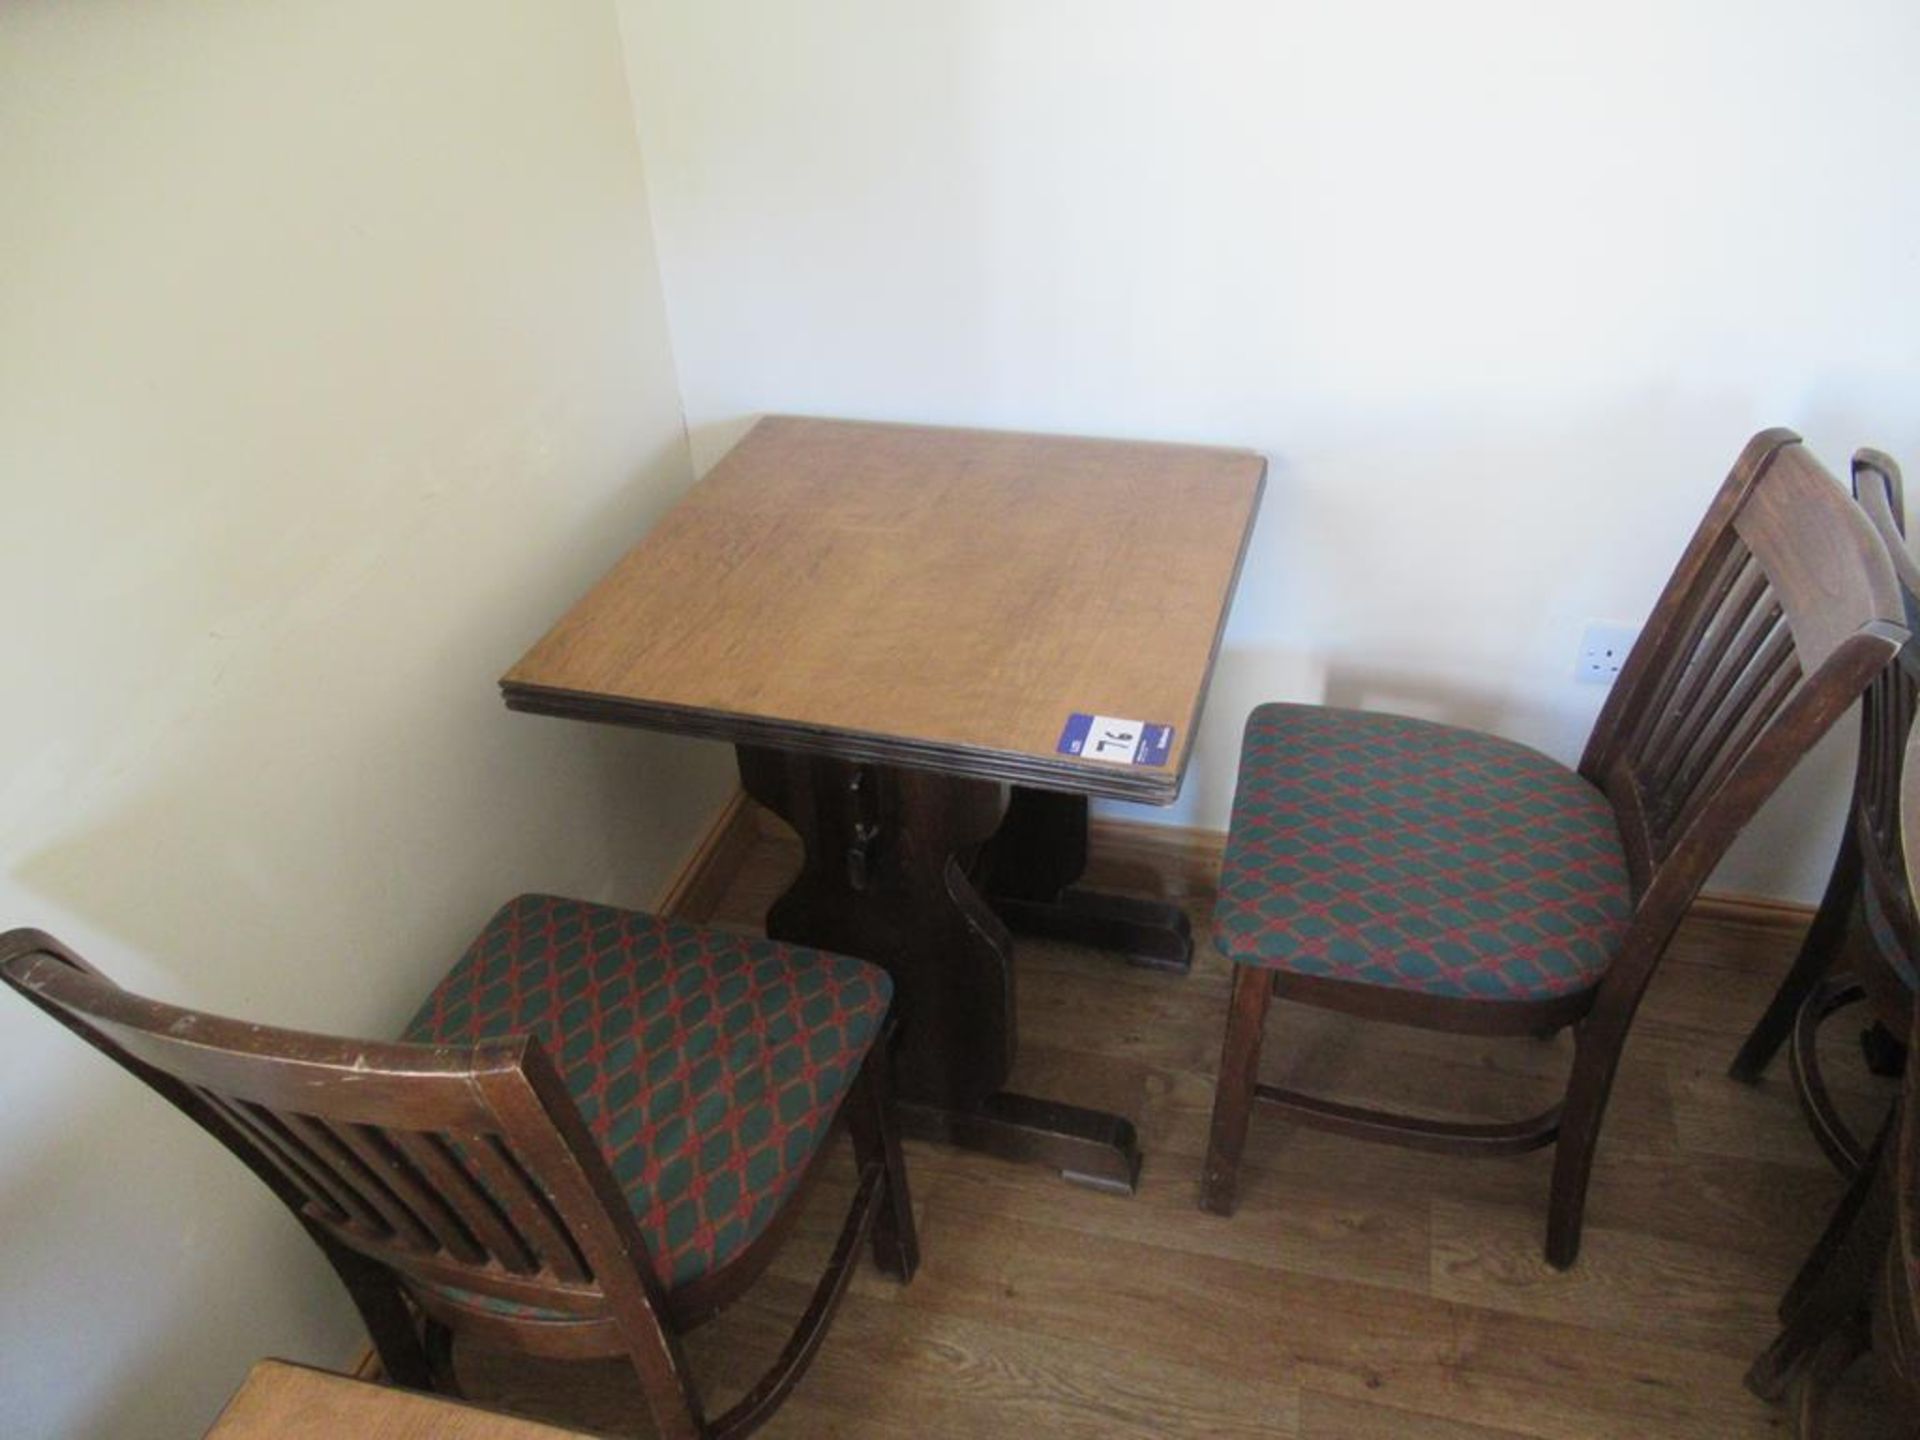 2 x Dark Oak Effect Wooden Framed Fabric Chairs with Dark Oak Effect Square Top Dining Table - Image 2 of 2